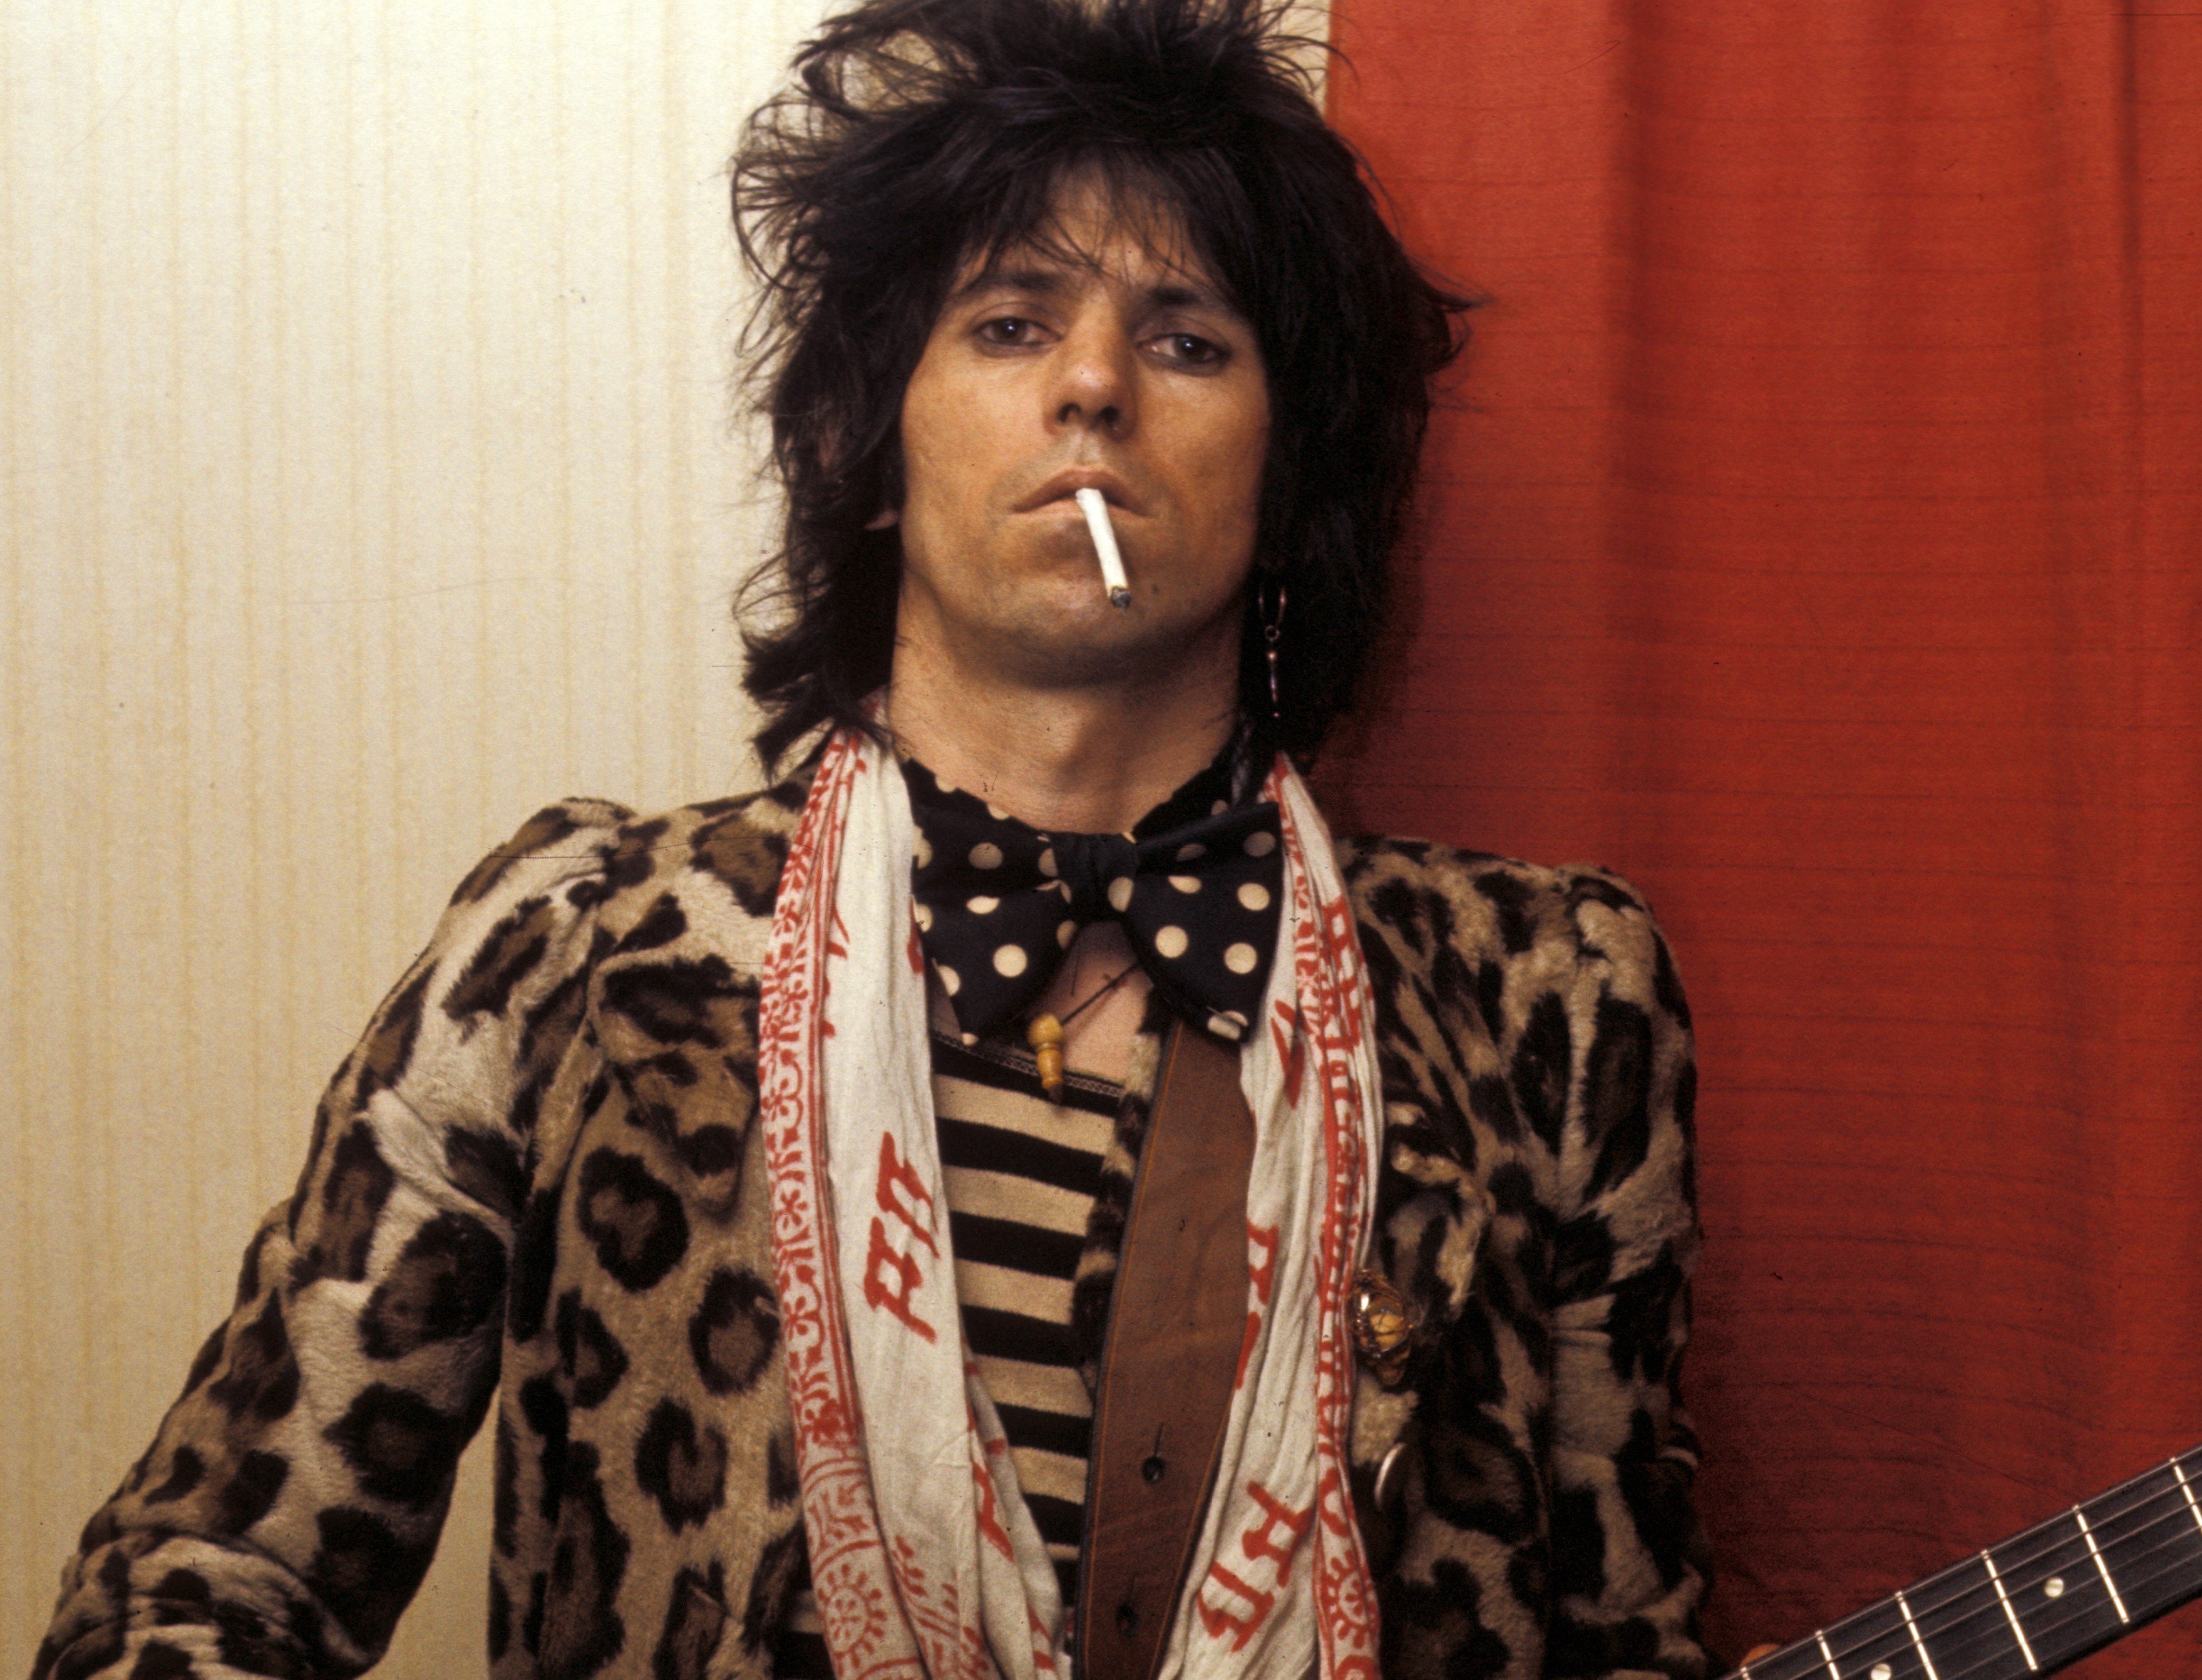 Keith Richards wearing a bow tie The Rolling Stones' "Sympathy for the Devil" era